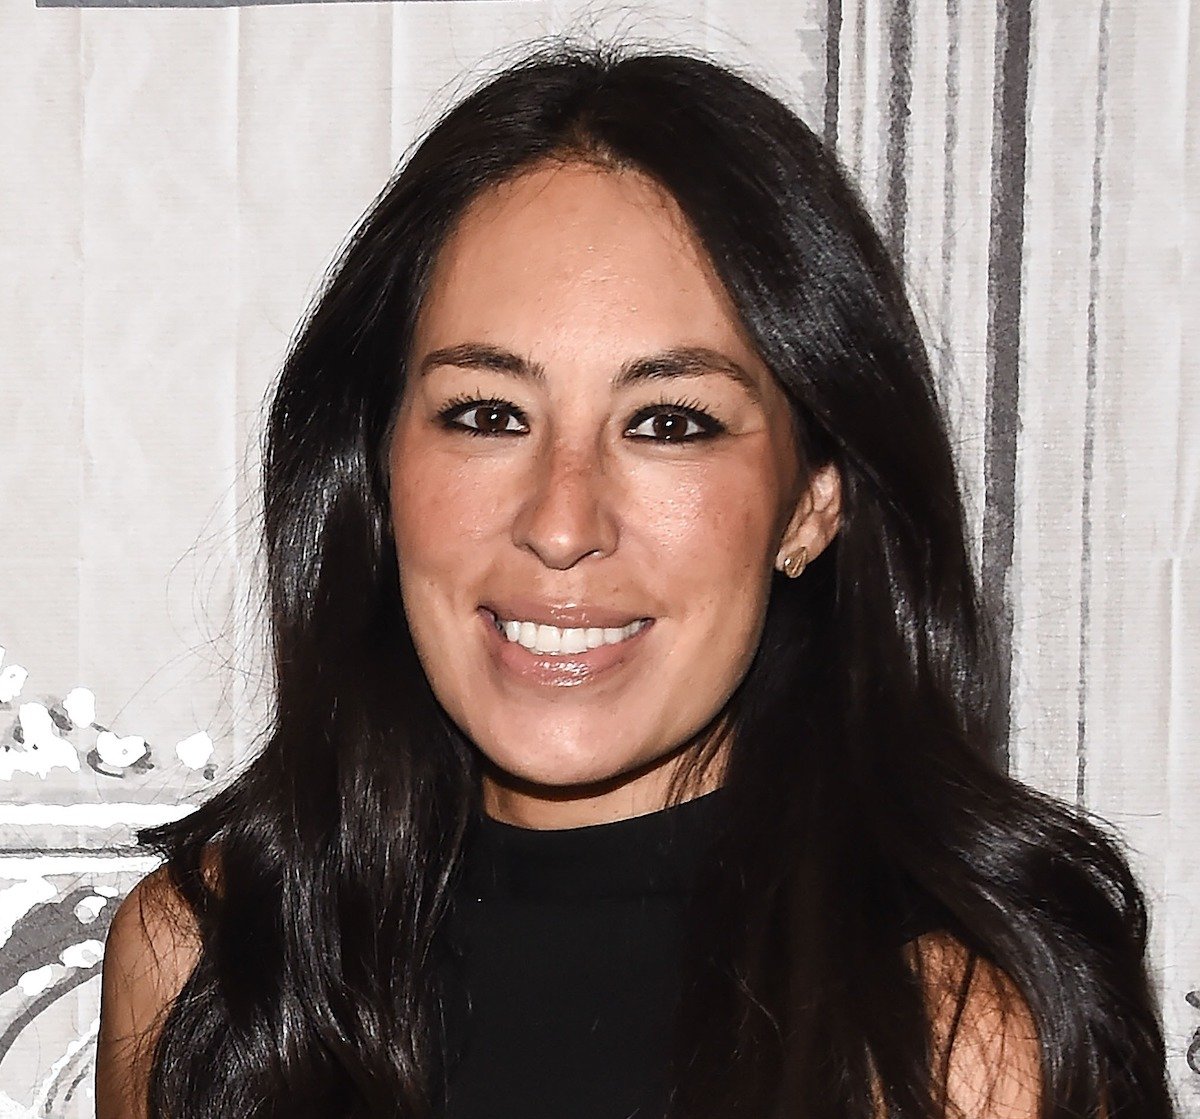 Joanna Gaines at the AOL Build Event